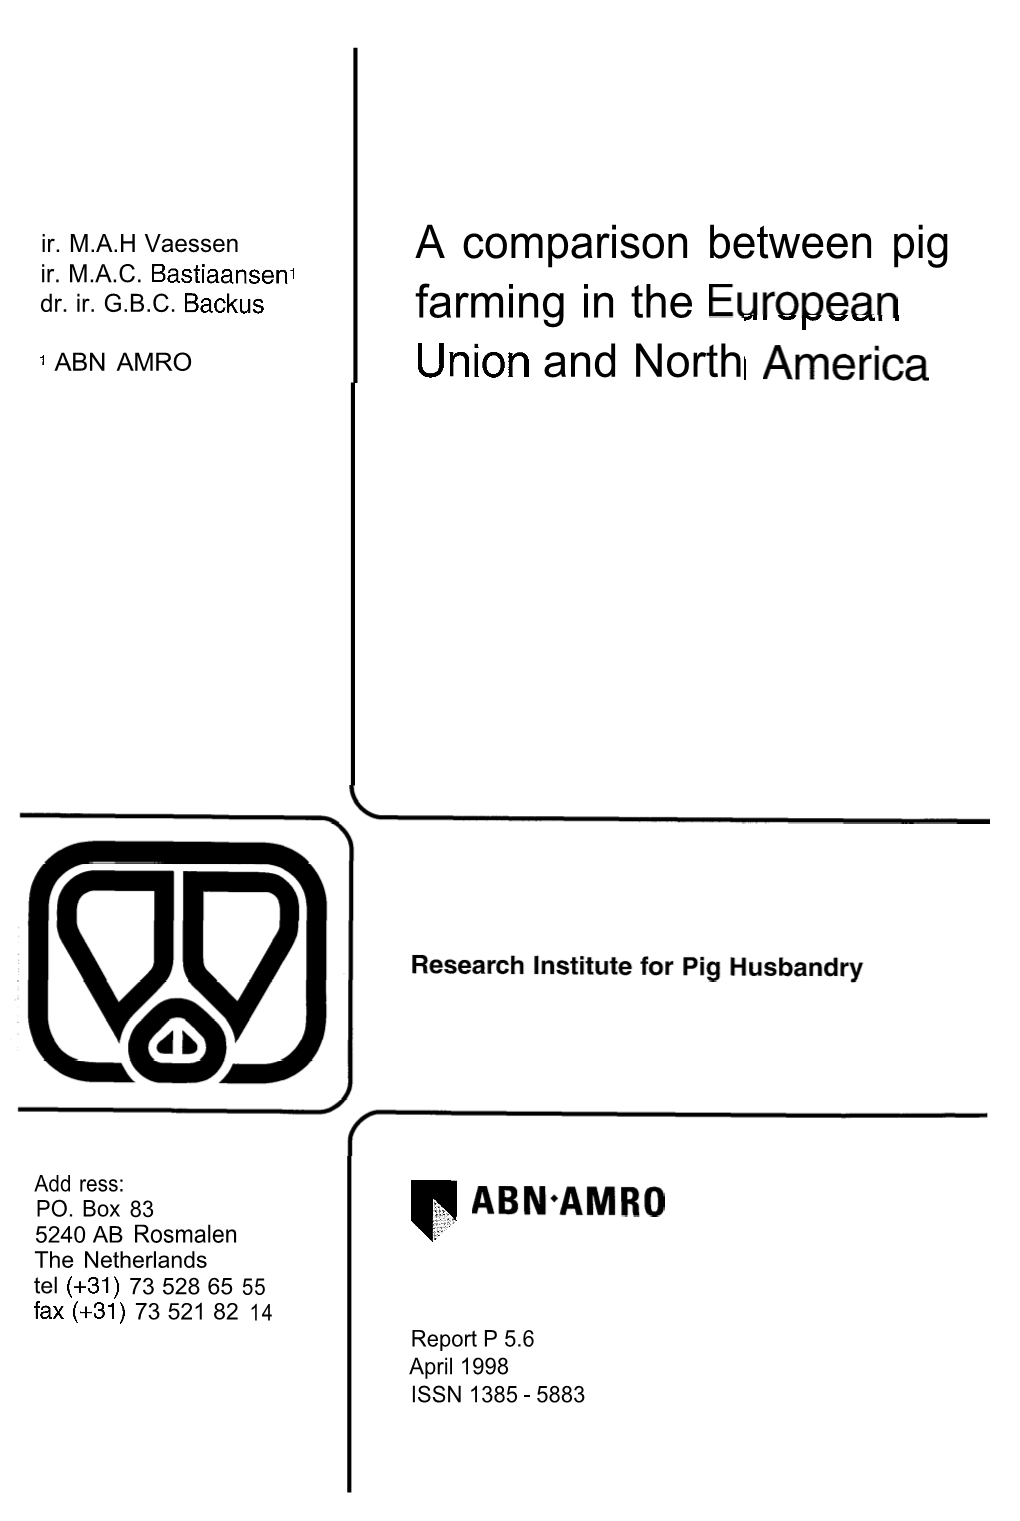 A Comparison Between Pig Farming in the Eurnn-N Union and North I